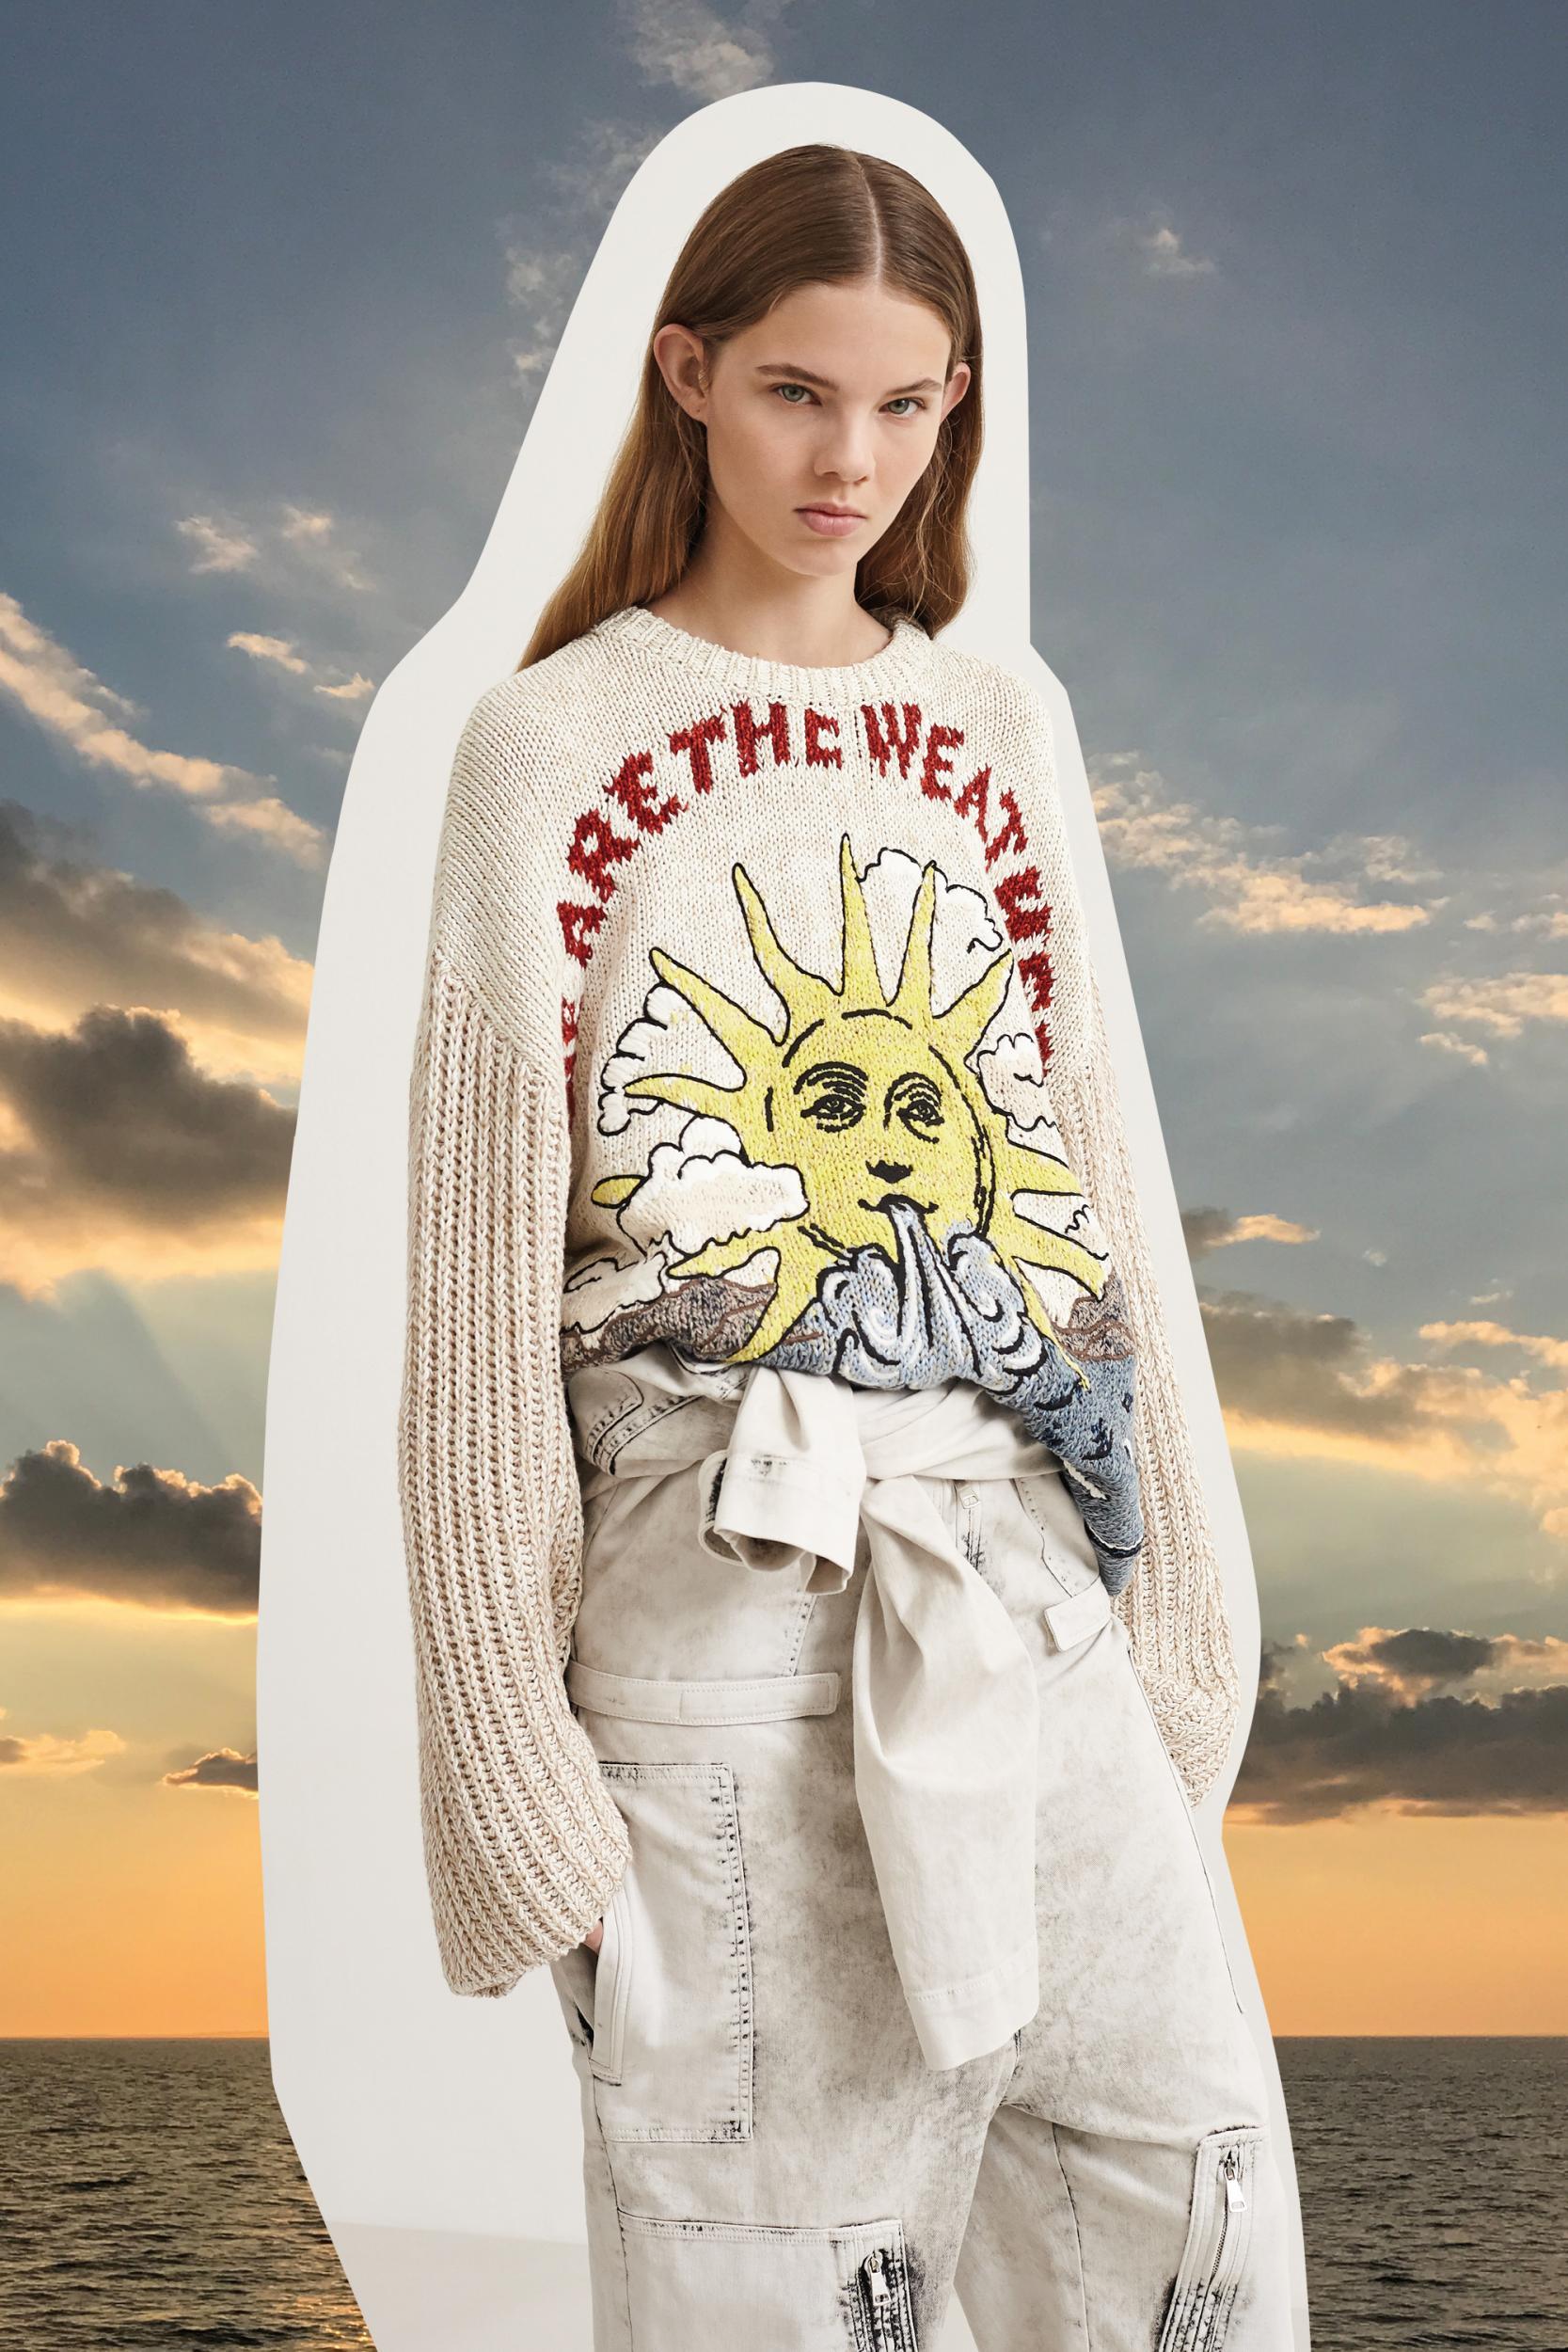 Pieces in the collection feature statements from Foer's book "We are the Weather" (Stella McCartney)